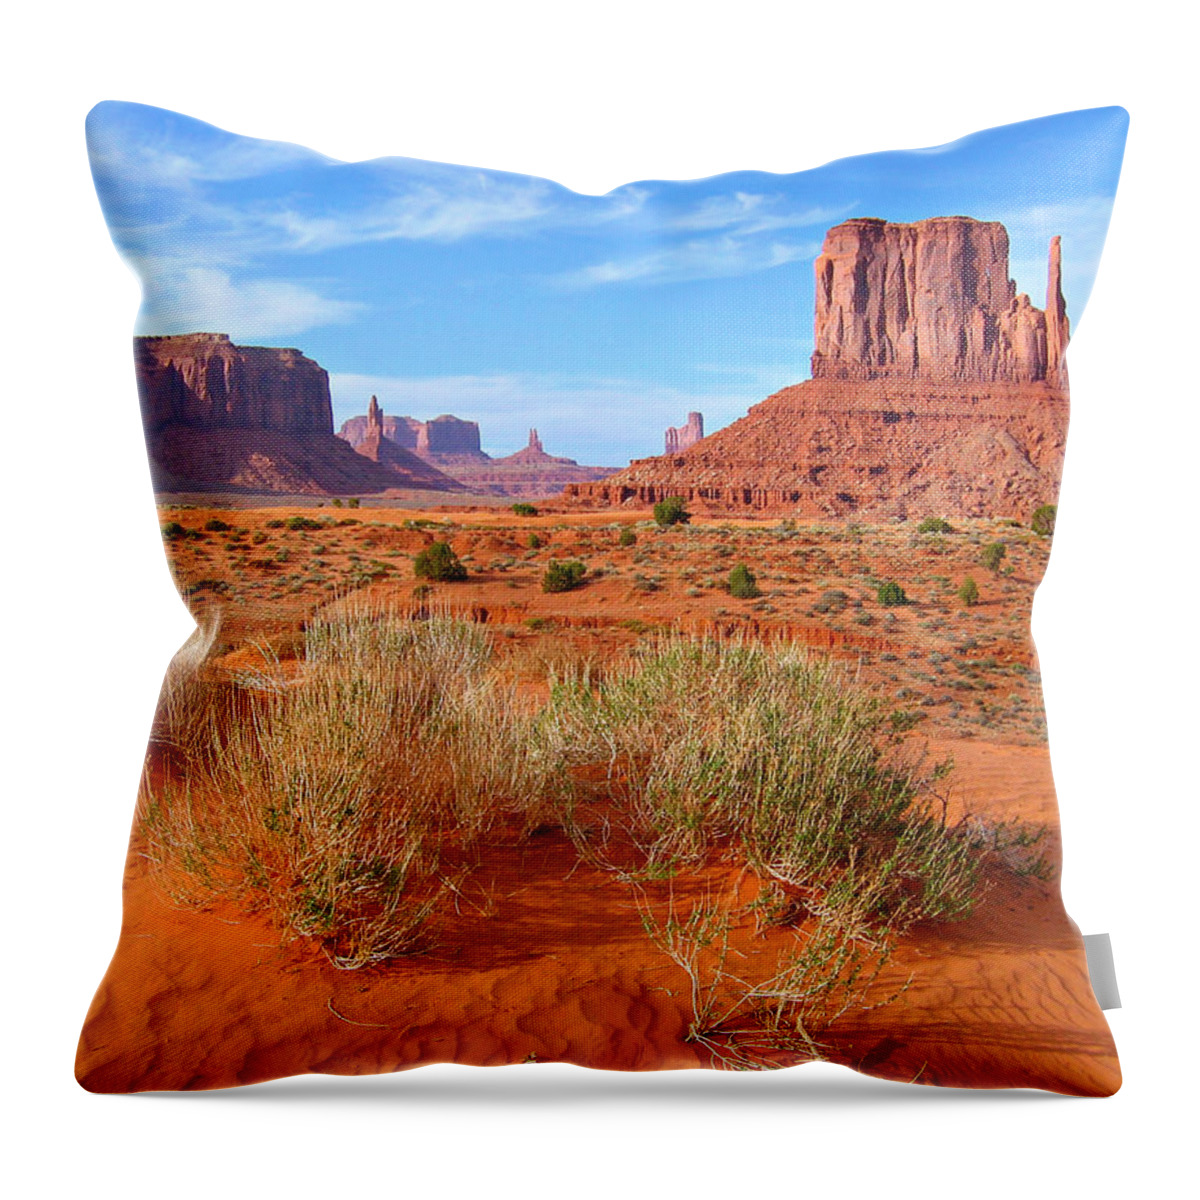 Tranquility Throw Pillow featuring the photograph Monument Valley Landscape by Sandra Leidholdt